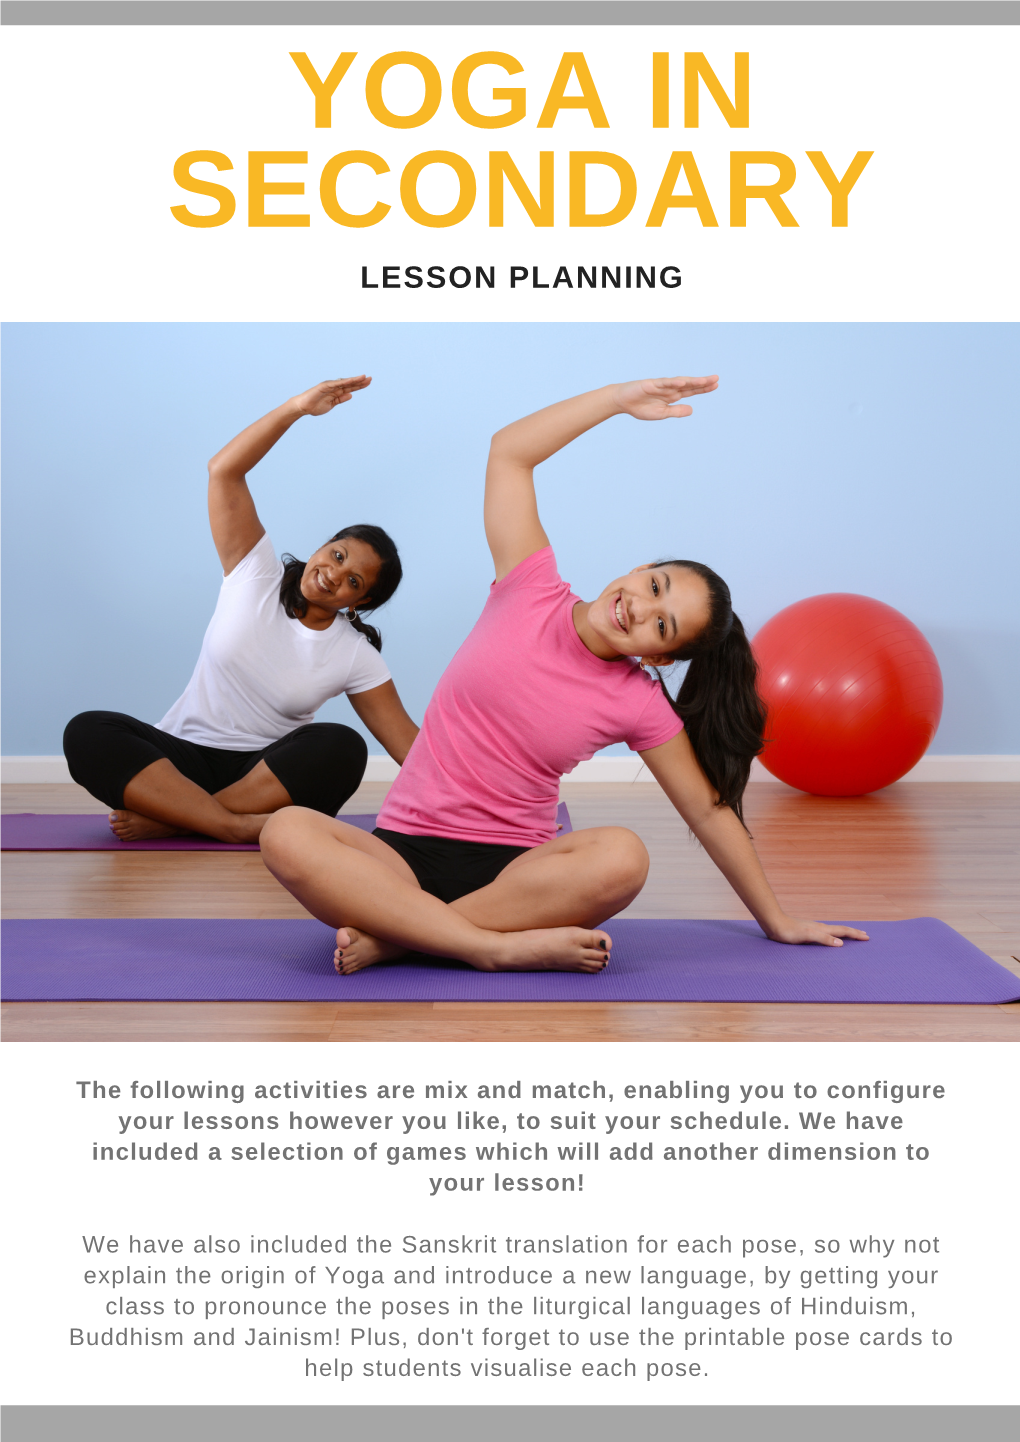 Yoga in Secondary Lesson Planning